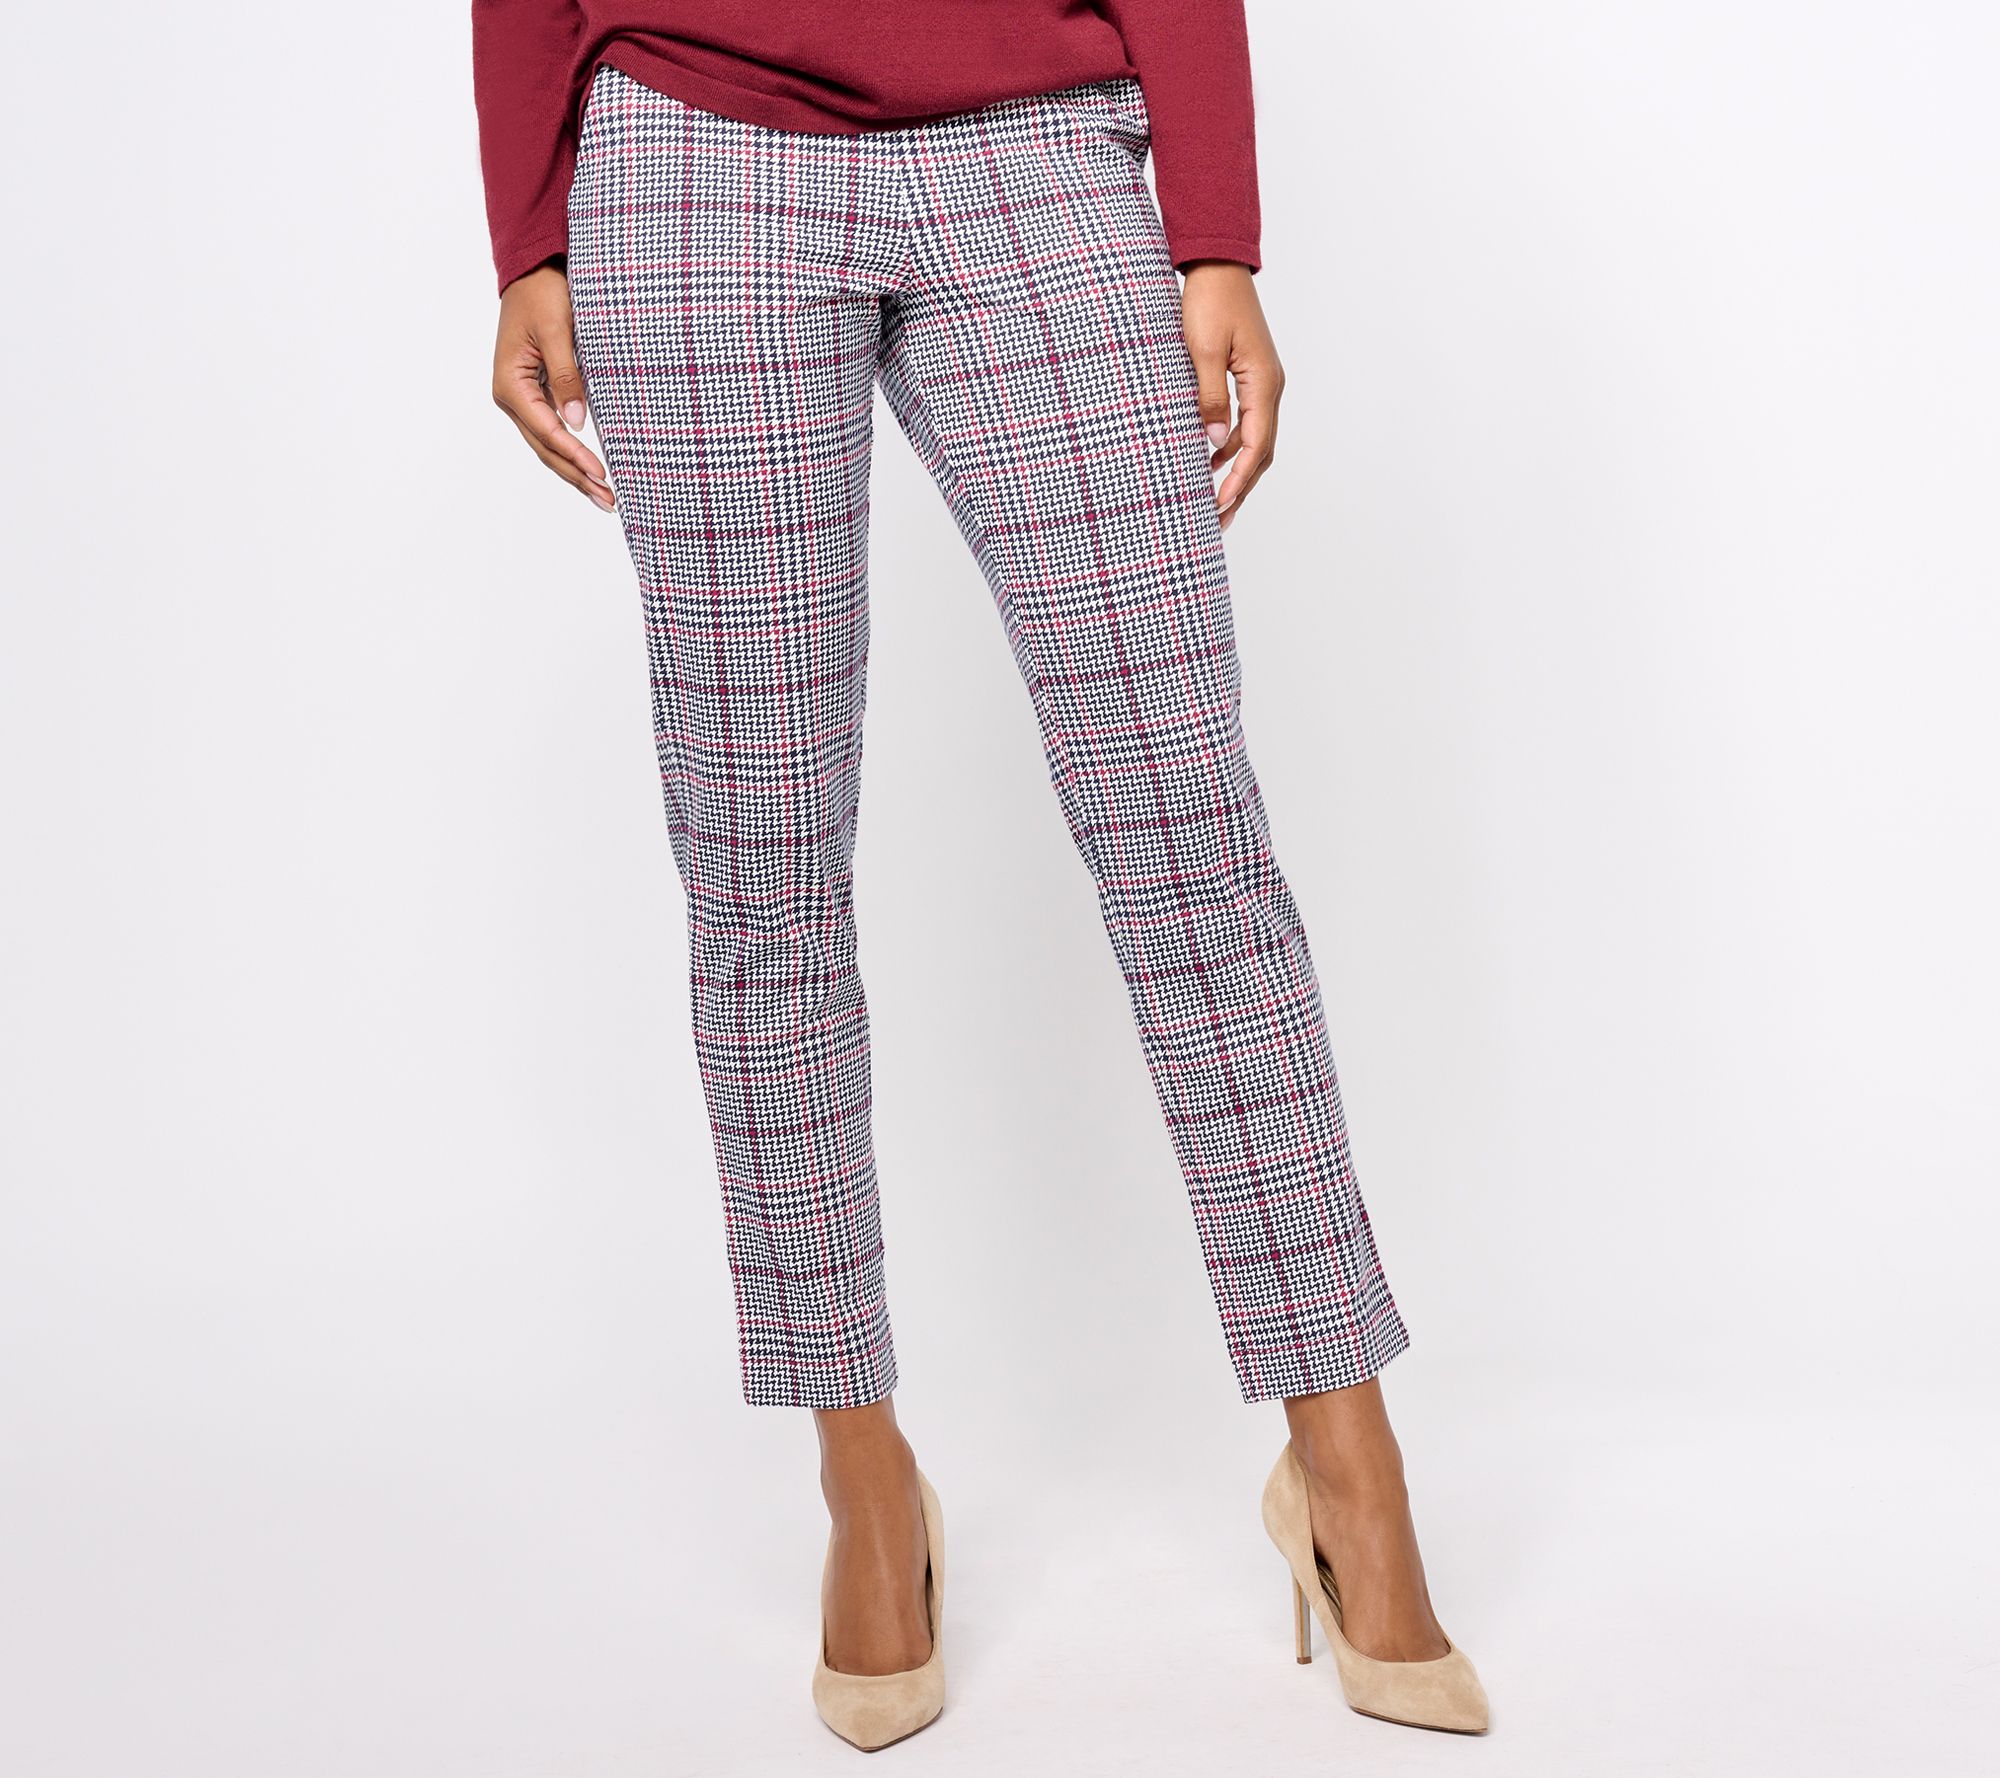 Denim & Co. Duo Stretch Petite Any Day Slim Straight Pant